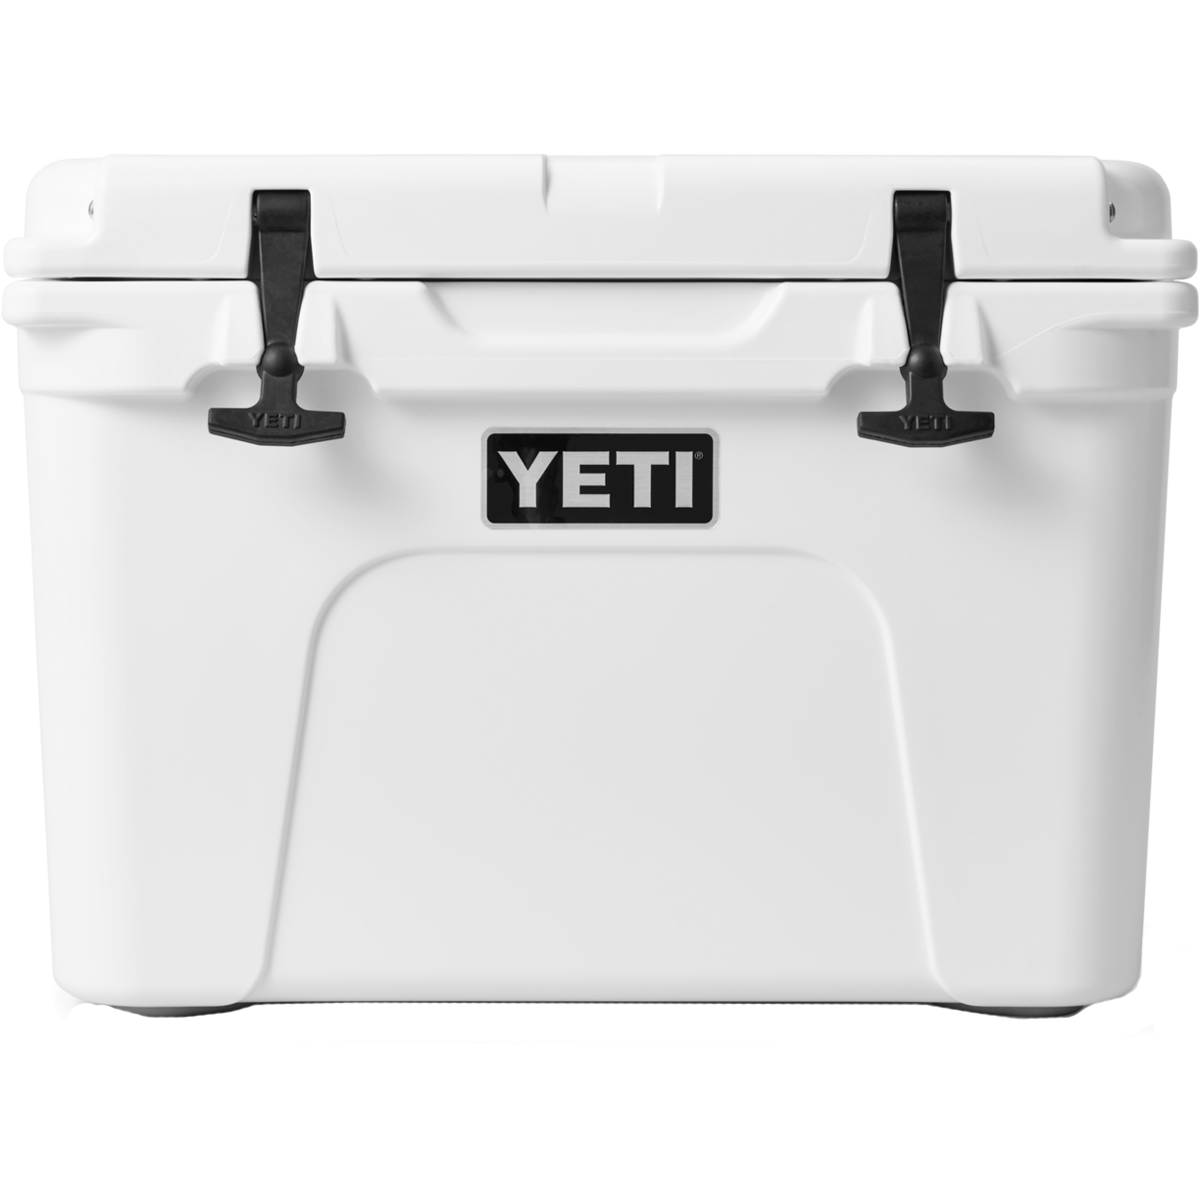 YETI: New in Chartreuse: Tundra Hard Coolers